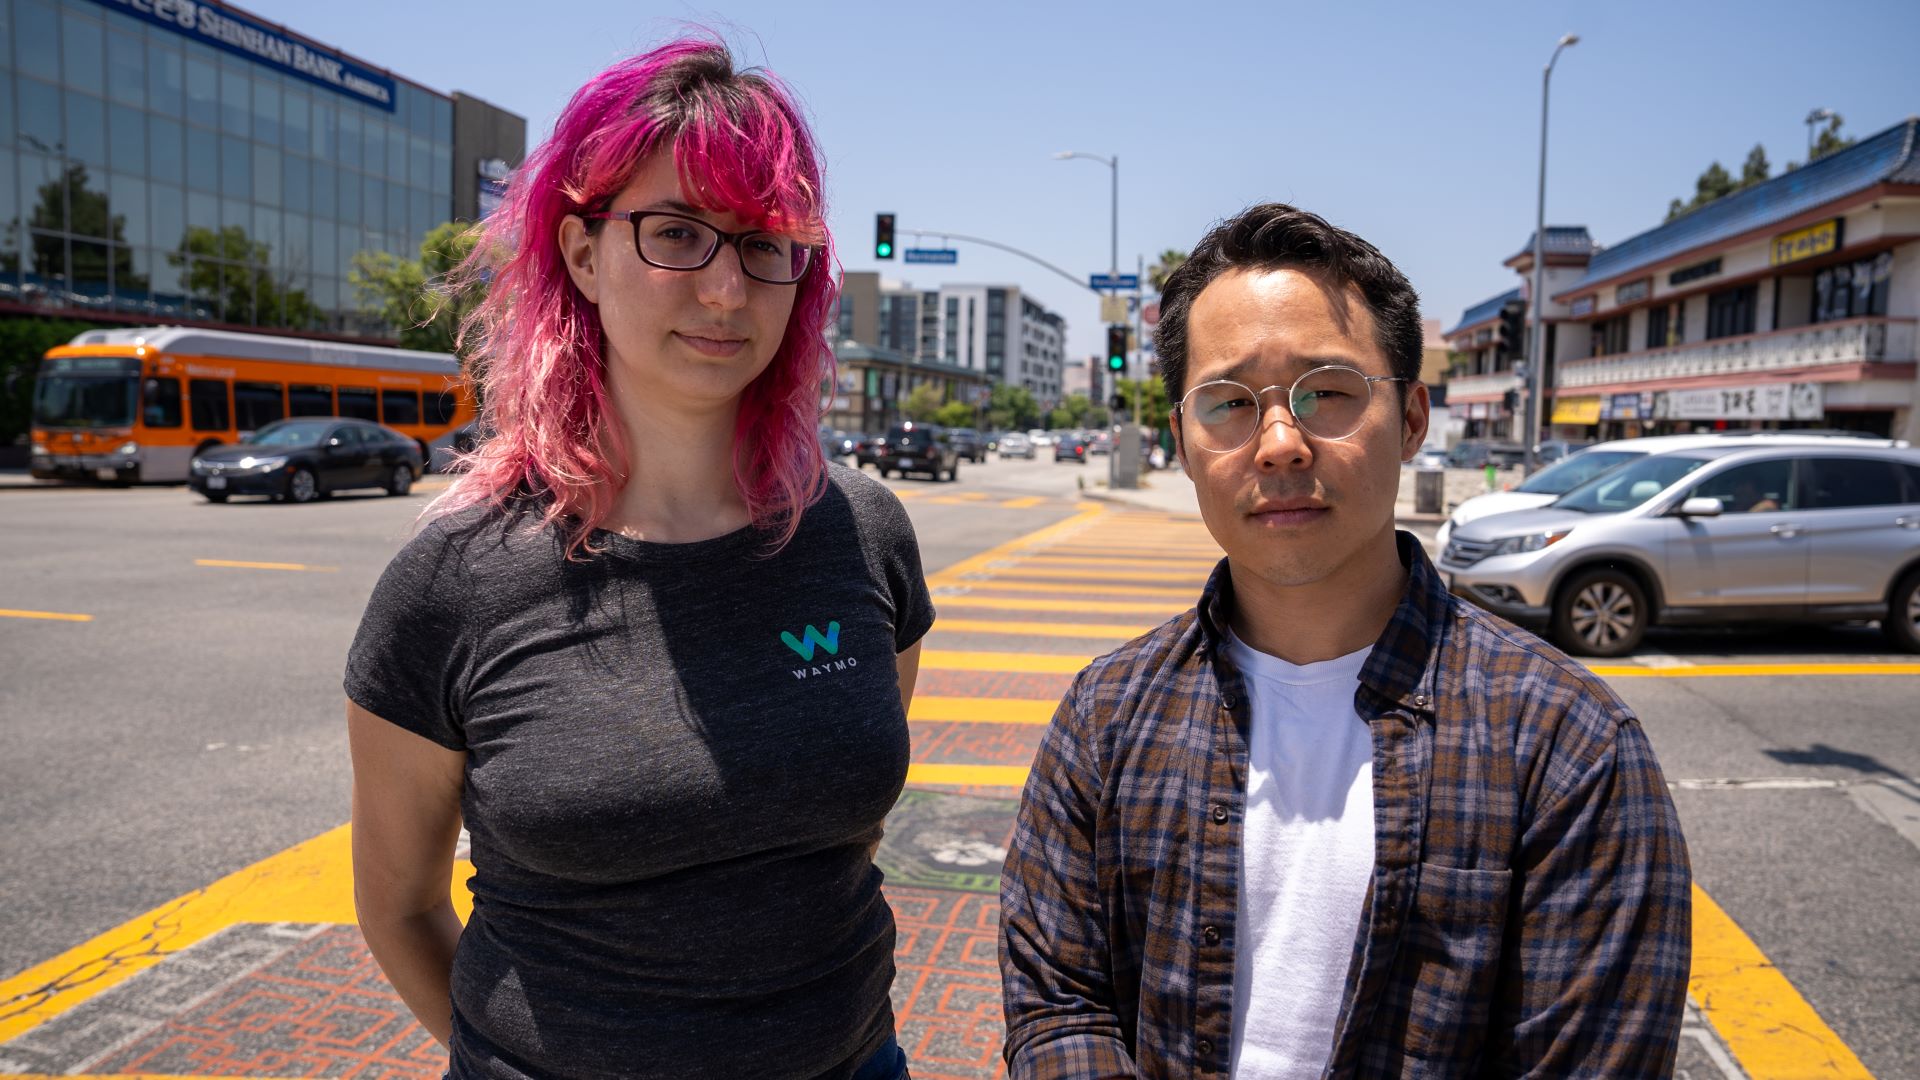 Waymo engineer and LA Walks executive director stand side-by-side on the corner of a busy intersection of Koreatown, Los Angeles